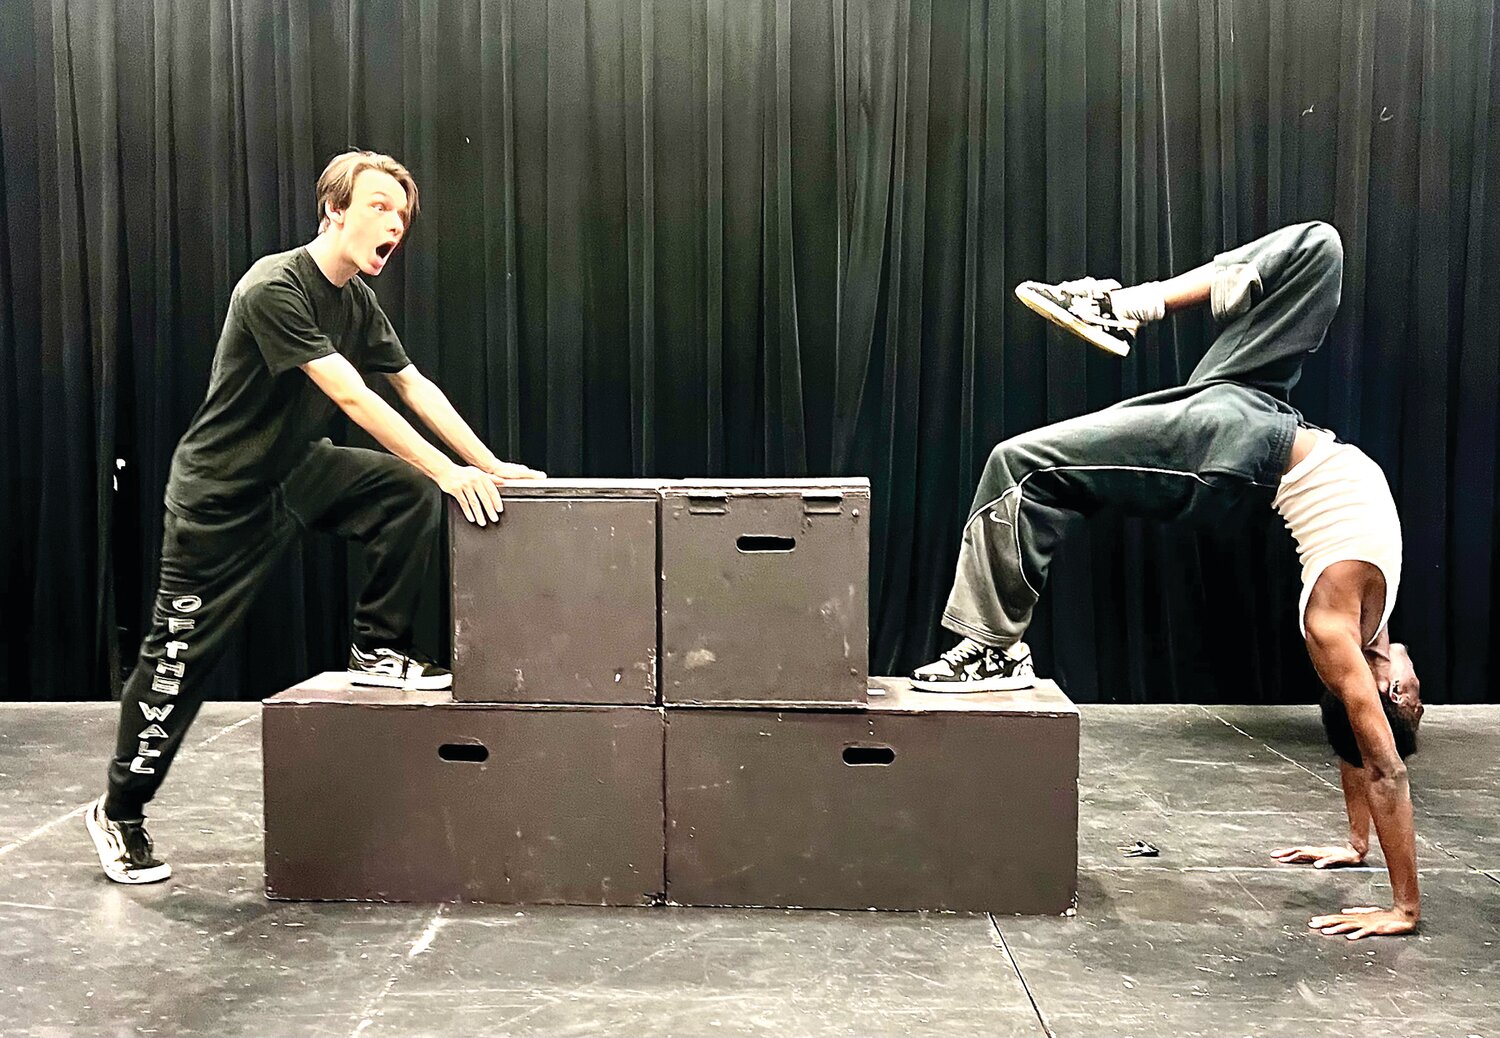 Jordan Schutz of Chesterfield, N.J., and Xazavion Lane, of Trenton, N.J., rehearse for the Mercer Dance Ensemble, performing for two nights only at MCCC’s Kelsey Theatre, May 11-12.